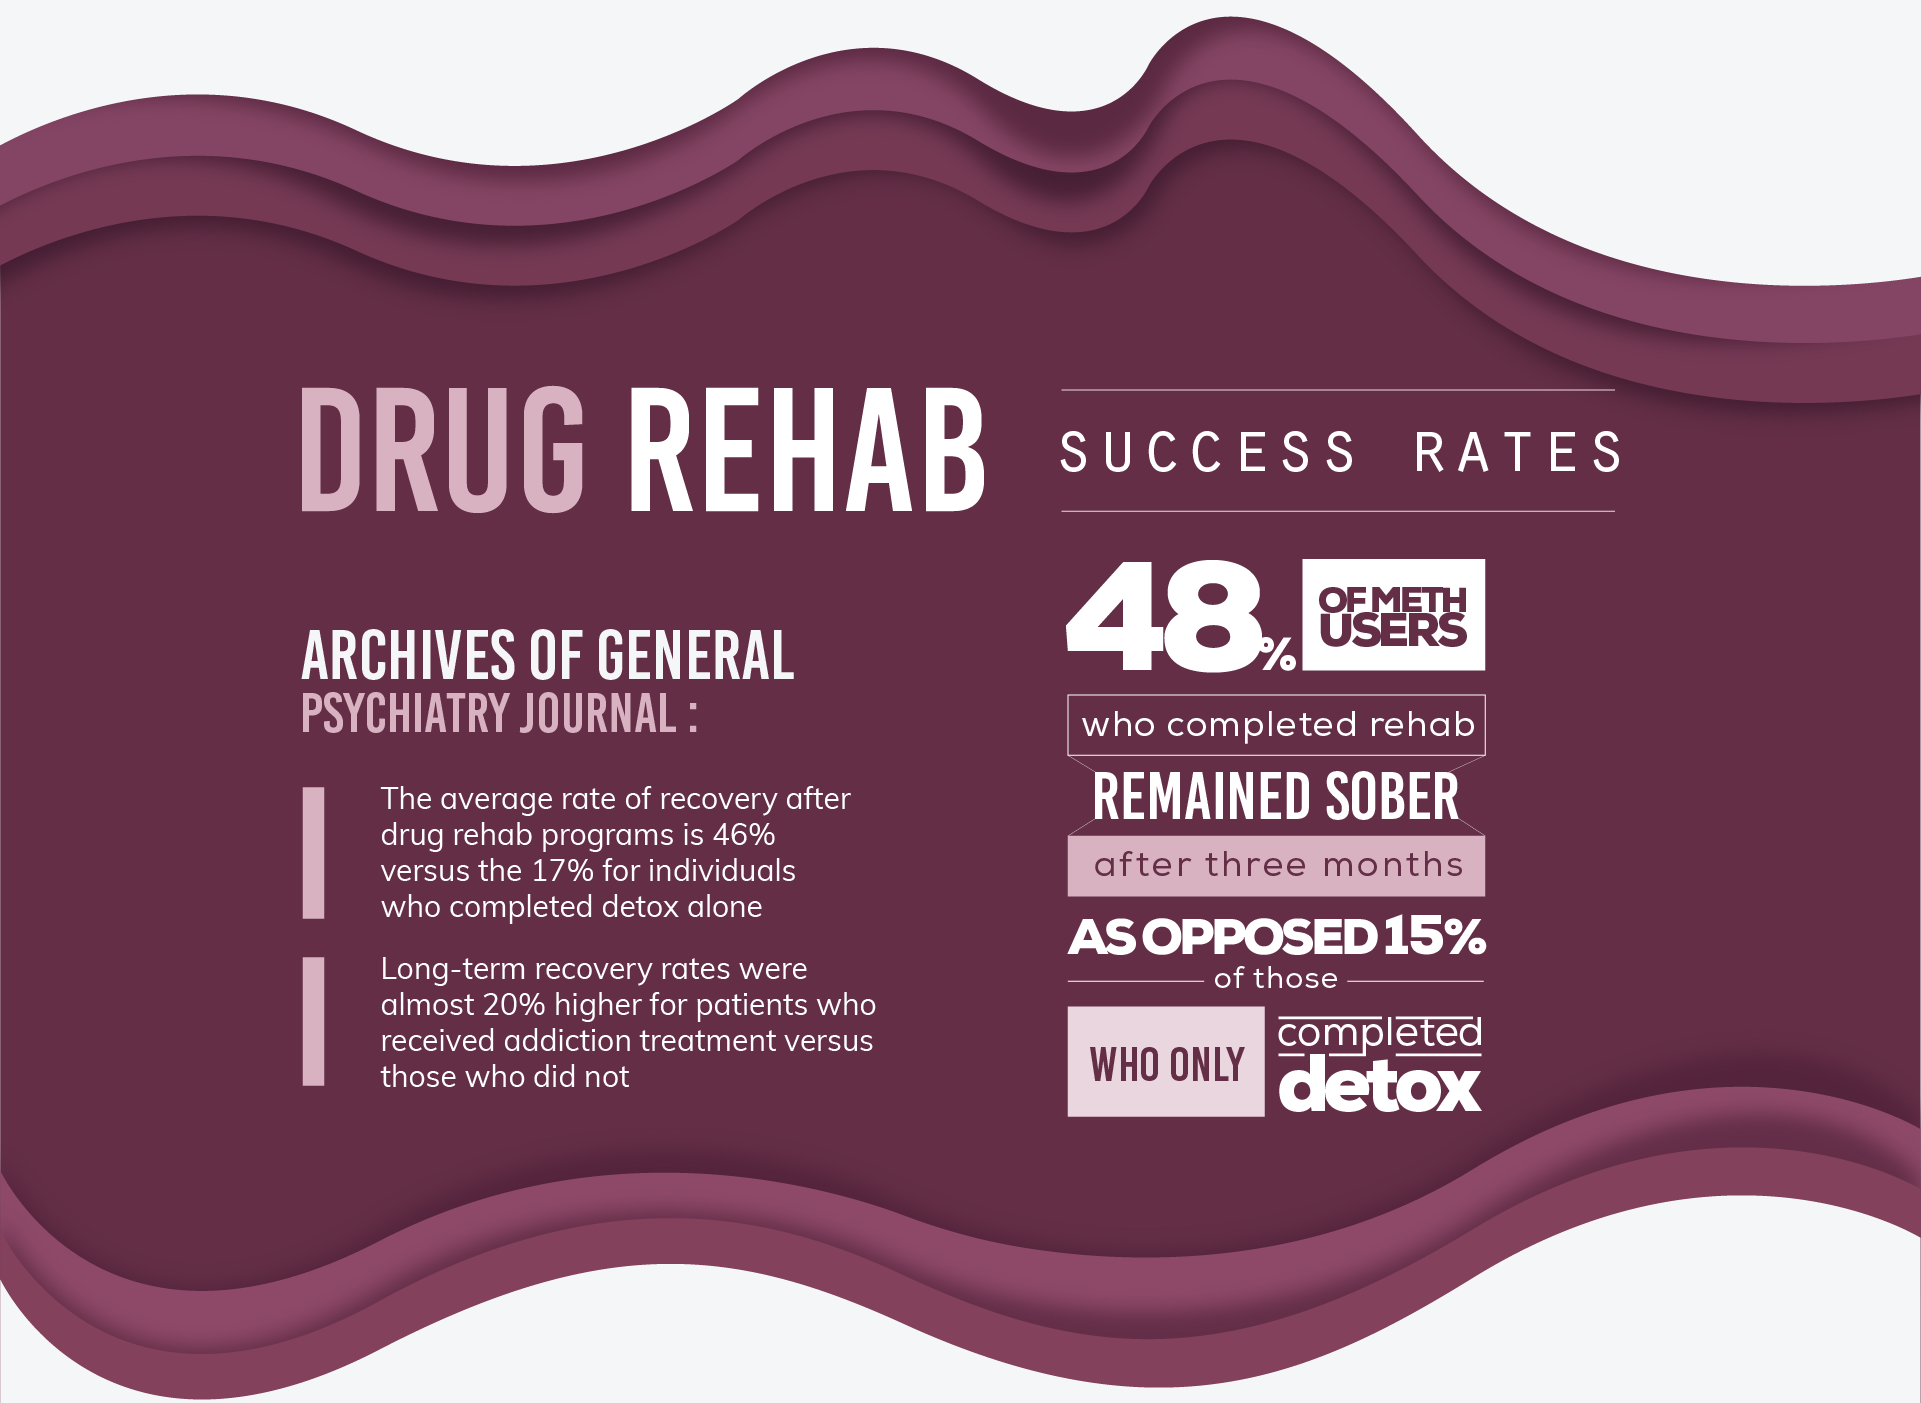 The average rate of recovery ater drug rehab programs is 46% versus the 17% for individuals who completed detox alone. Long-term recovery rates were almost 20% higher for patients who received addiction treatment versus those who did not. 48% of meth users who completed rehab remained sober after three months as opposed 15% of those who only completed detox